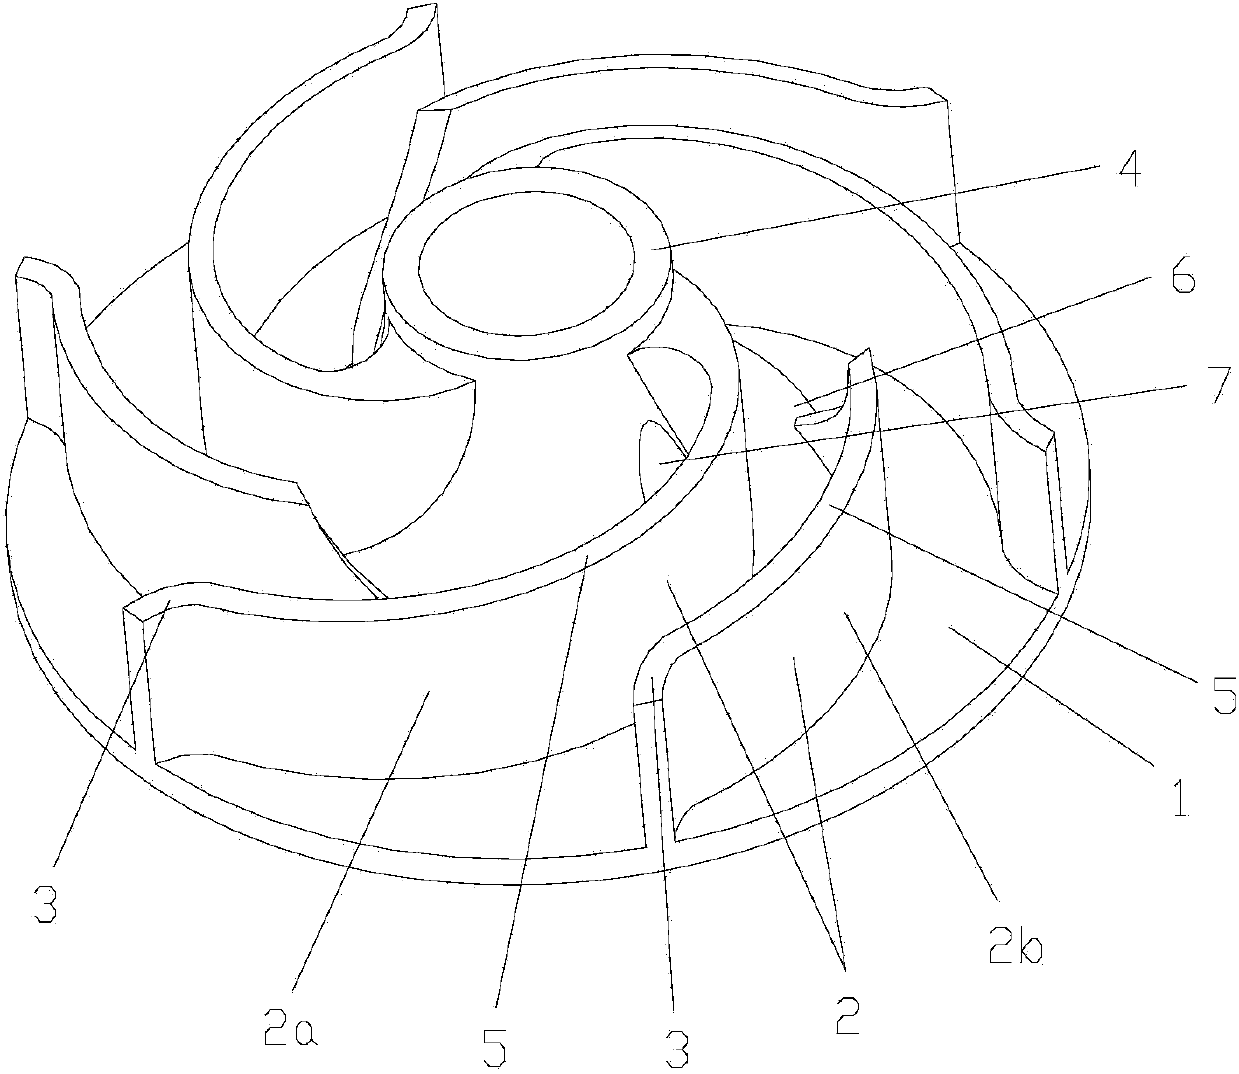 Epicycloid centrifugal pump impeller